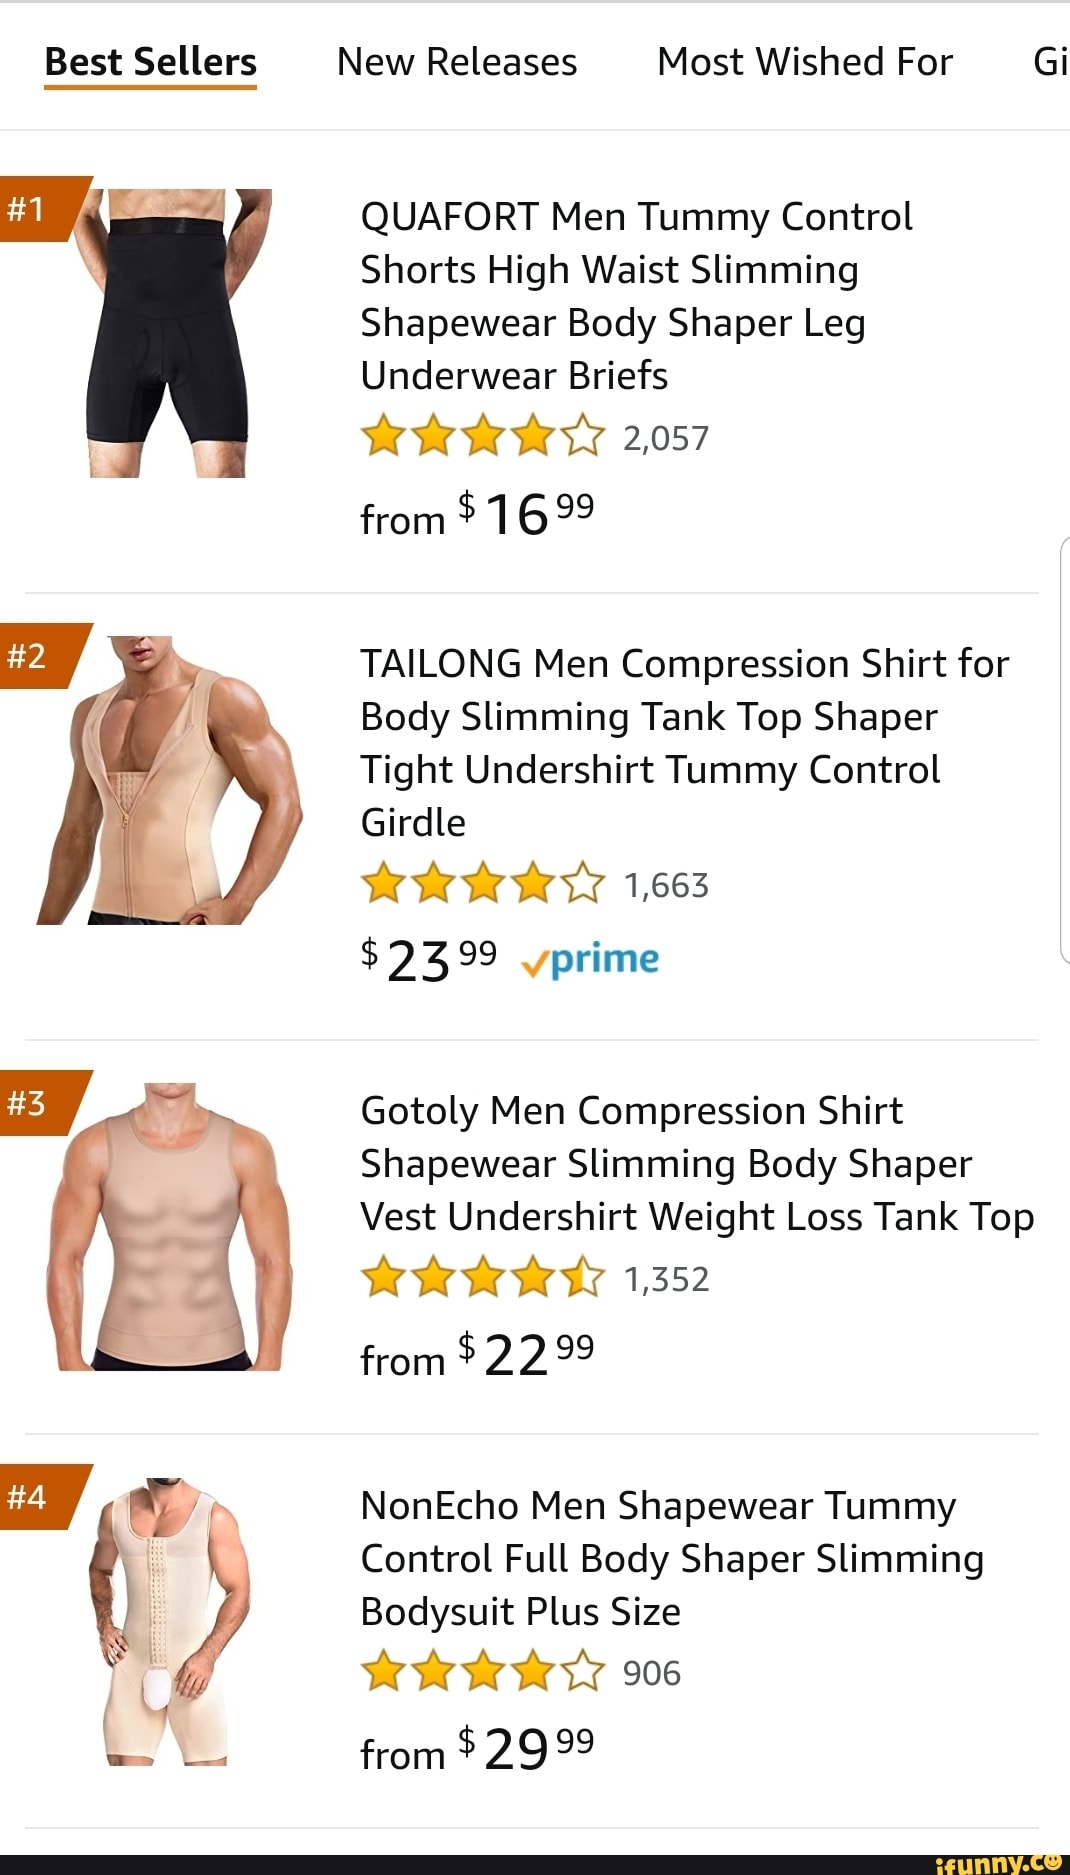 Best Sellers New Releases Most Wished For Gi QUAFORT Men Tummy